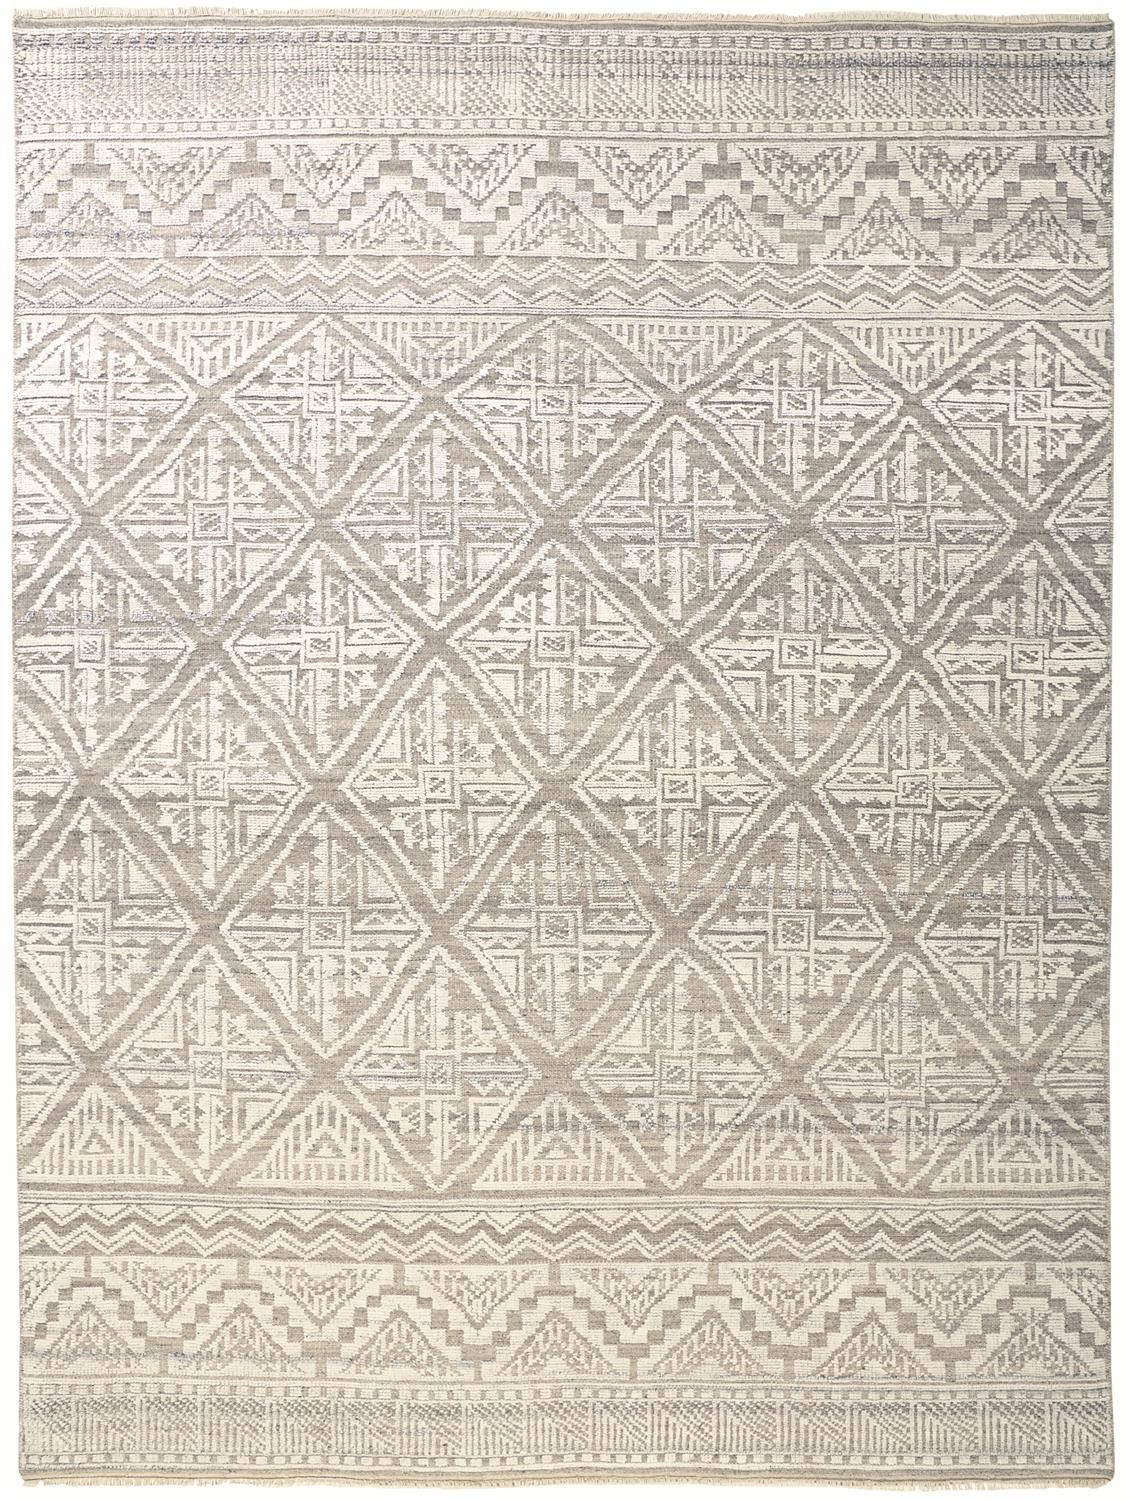 10' X 13' Ivory Tan And Gray Geometric Hand Knotted Area Rug-512584-1